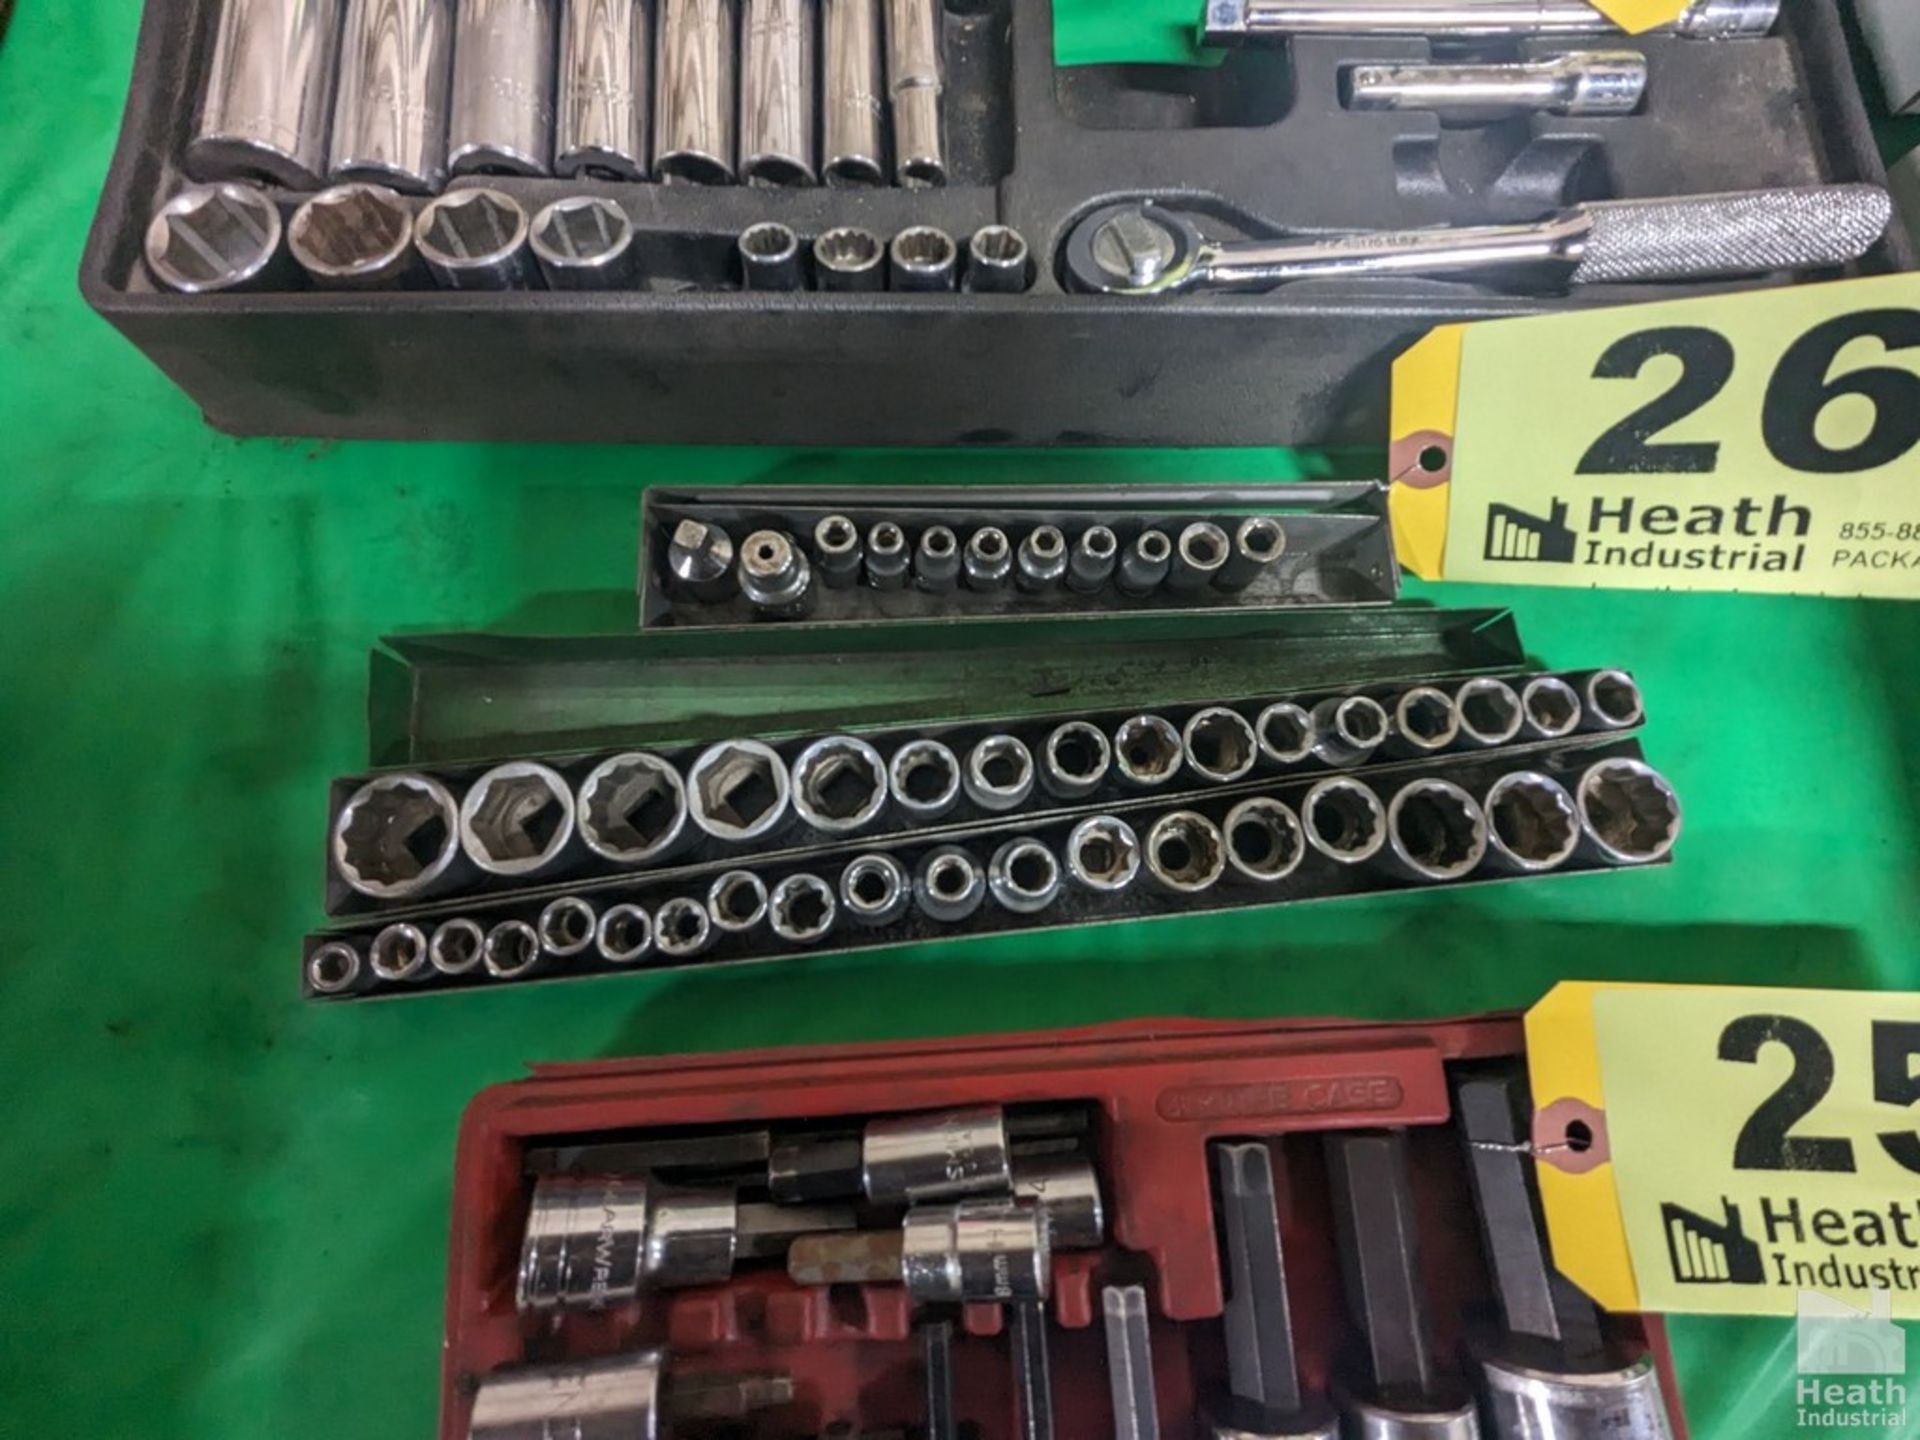 (3) SETS OF ASSORTED 3/8" AND 1/4" SOCKETS